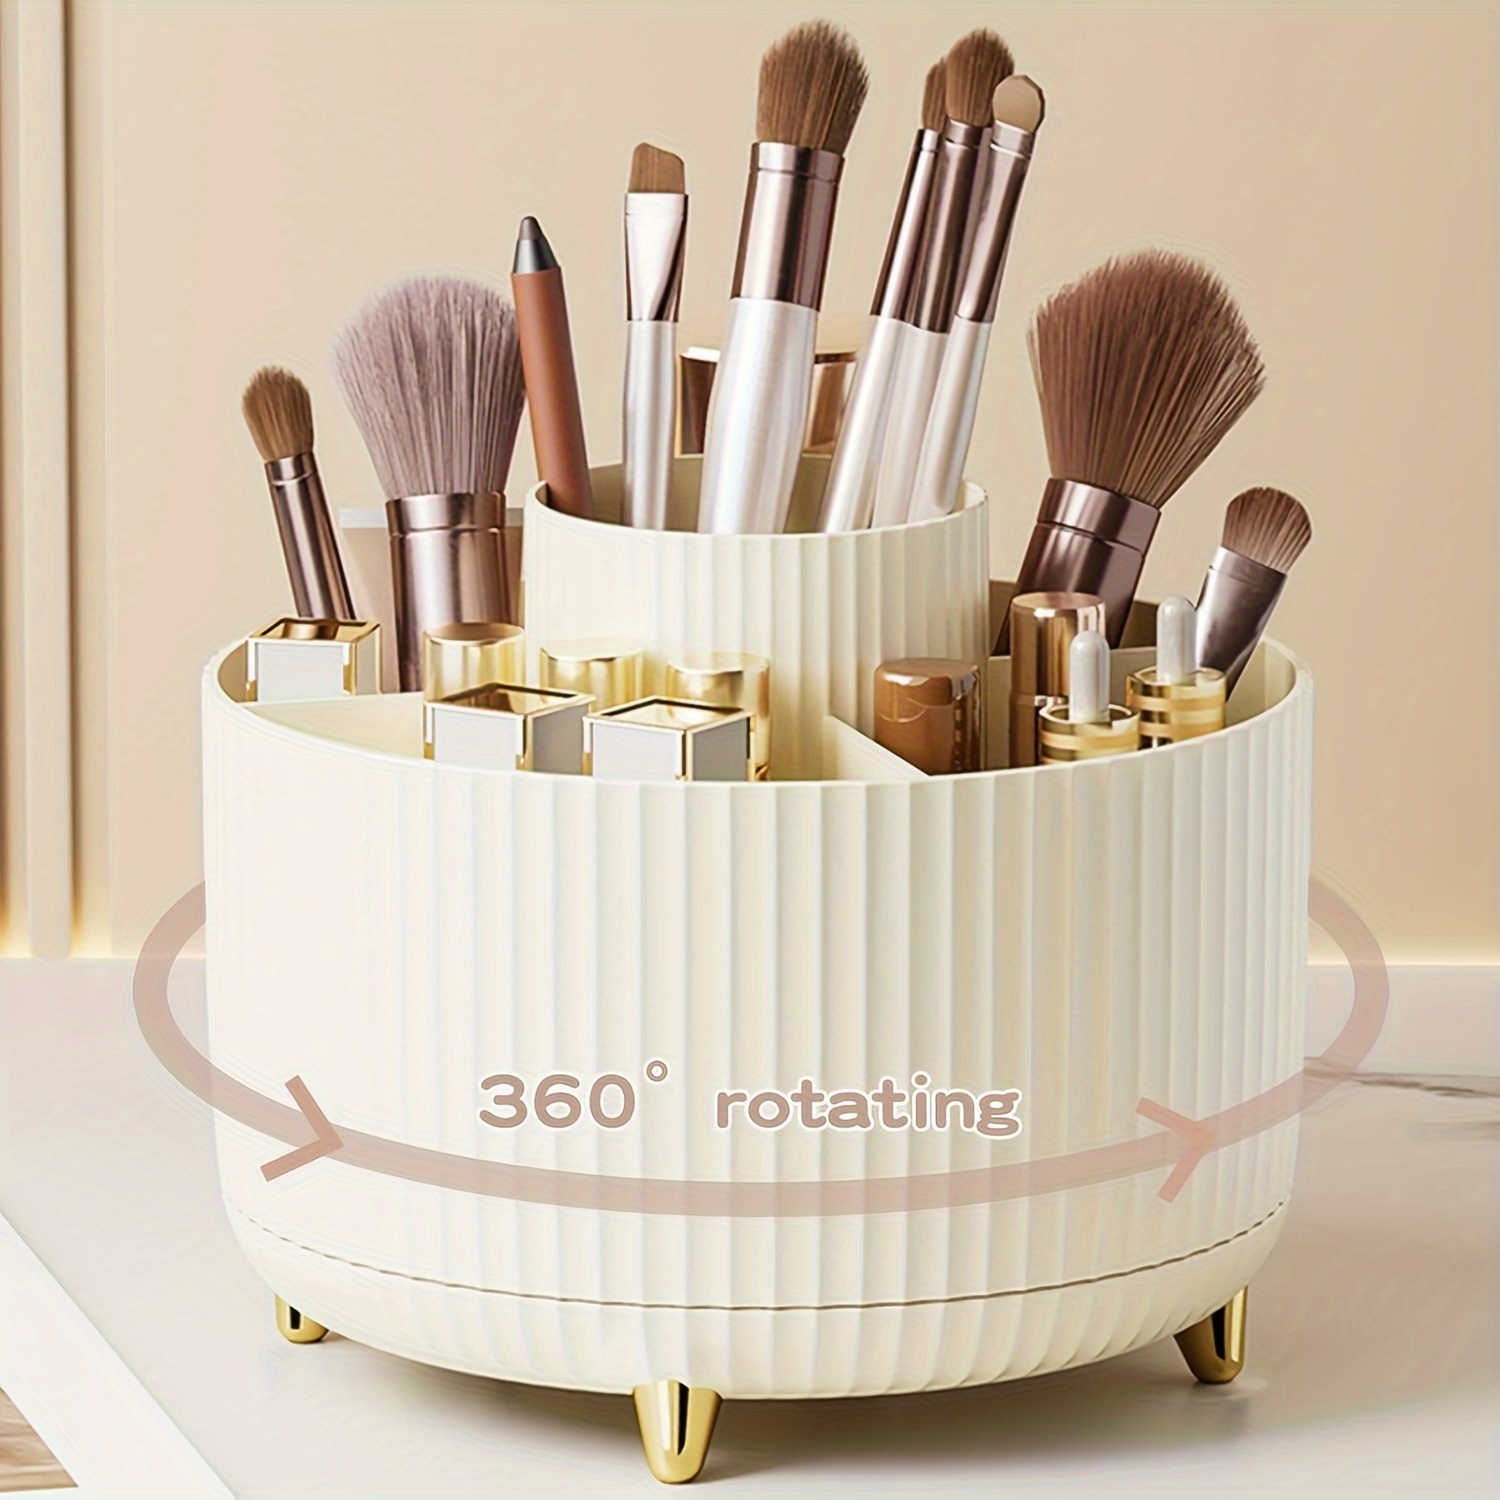 

360-degree Rotating Makeup Organizer - Large Capacity Cosmetic Storage Box With Multi-compartment Design, Ideal For Bathroom Essentials